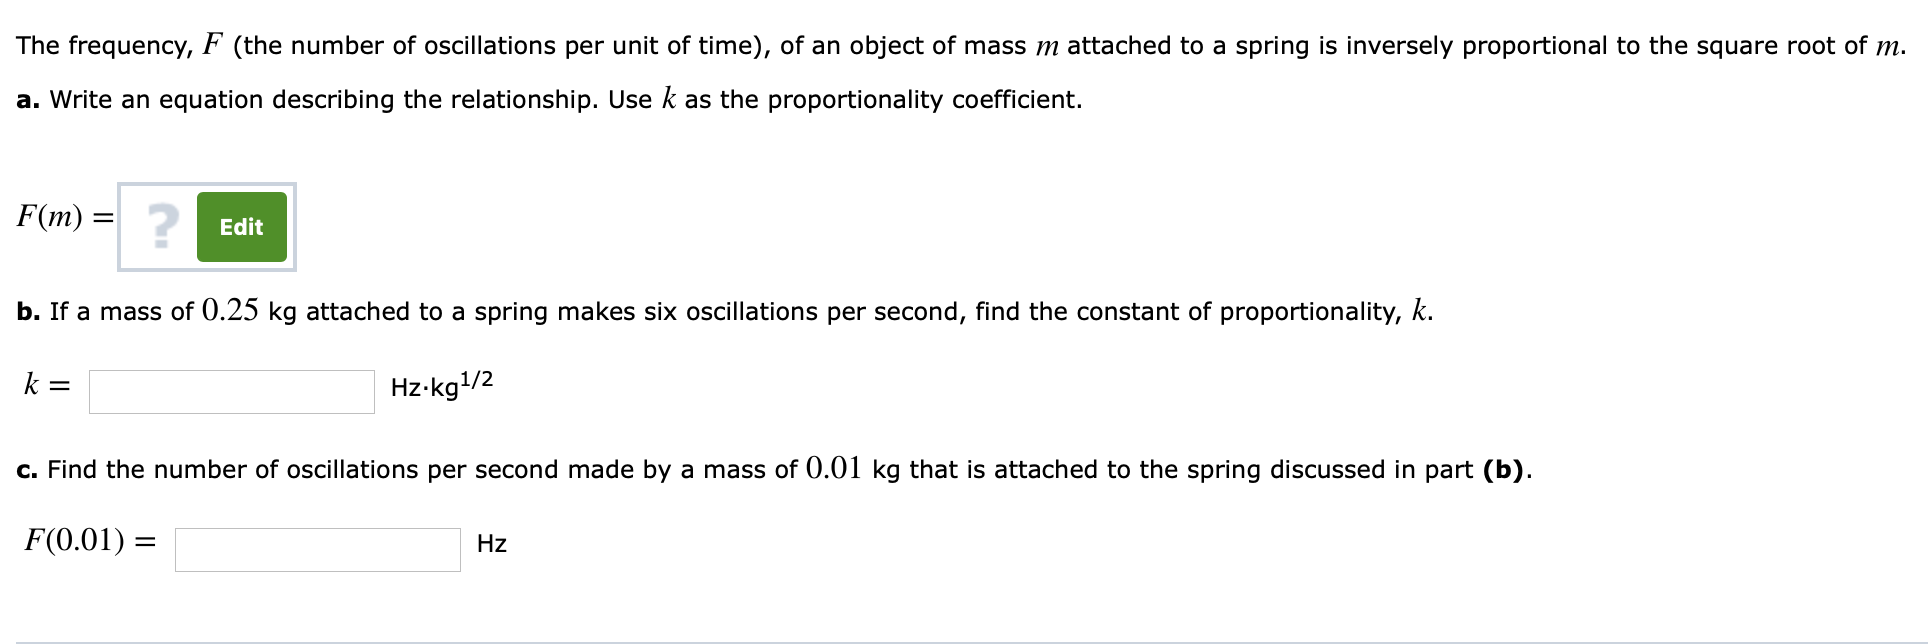 The frequency, F (the number of oscillations per unit of time), of an object of mass m attached to a spring is inversely proportional to the square root of m.
a. Write an equation describing the relationship. Use k as the proportionality coefficient.
Edit
b. If a mass of 0.25 kg attached to a spring makes six oscillations per second, find the constant of proportionality, k.
Hz kg1/2
c.Find the number of oscillations per second made by a mass of 0.01 kg that is attached to the spring discussed in part (b)
F(0.01)
Hz
